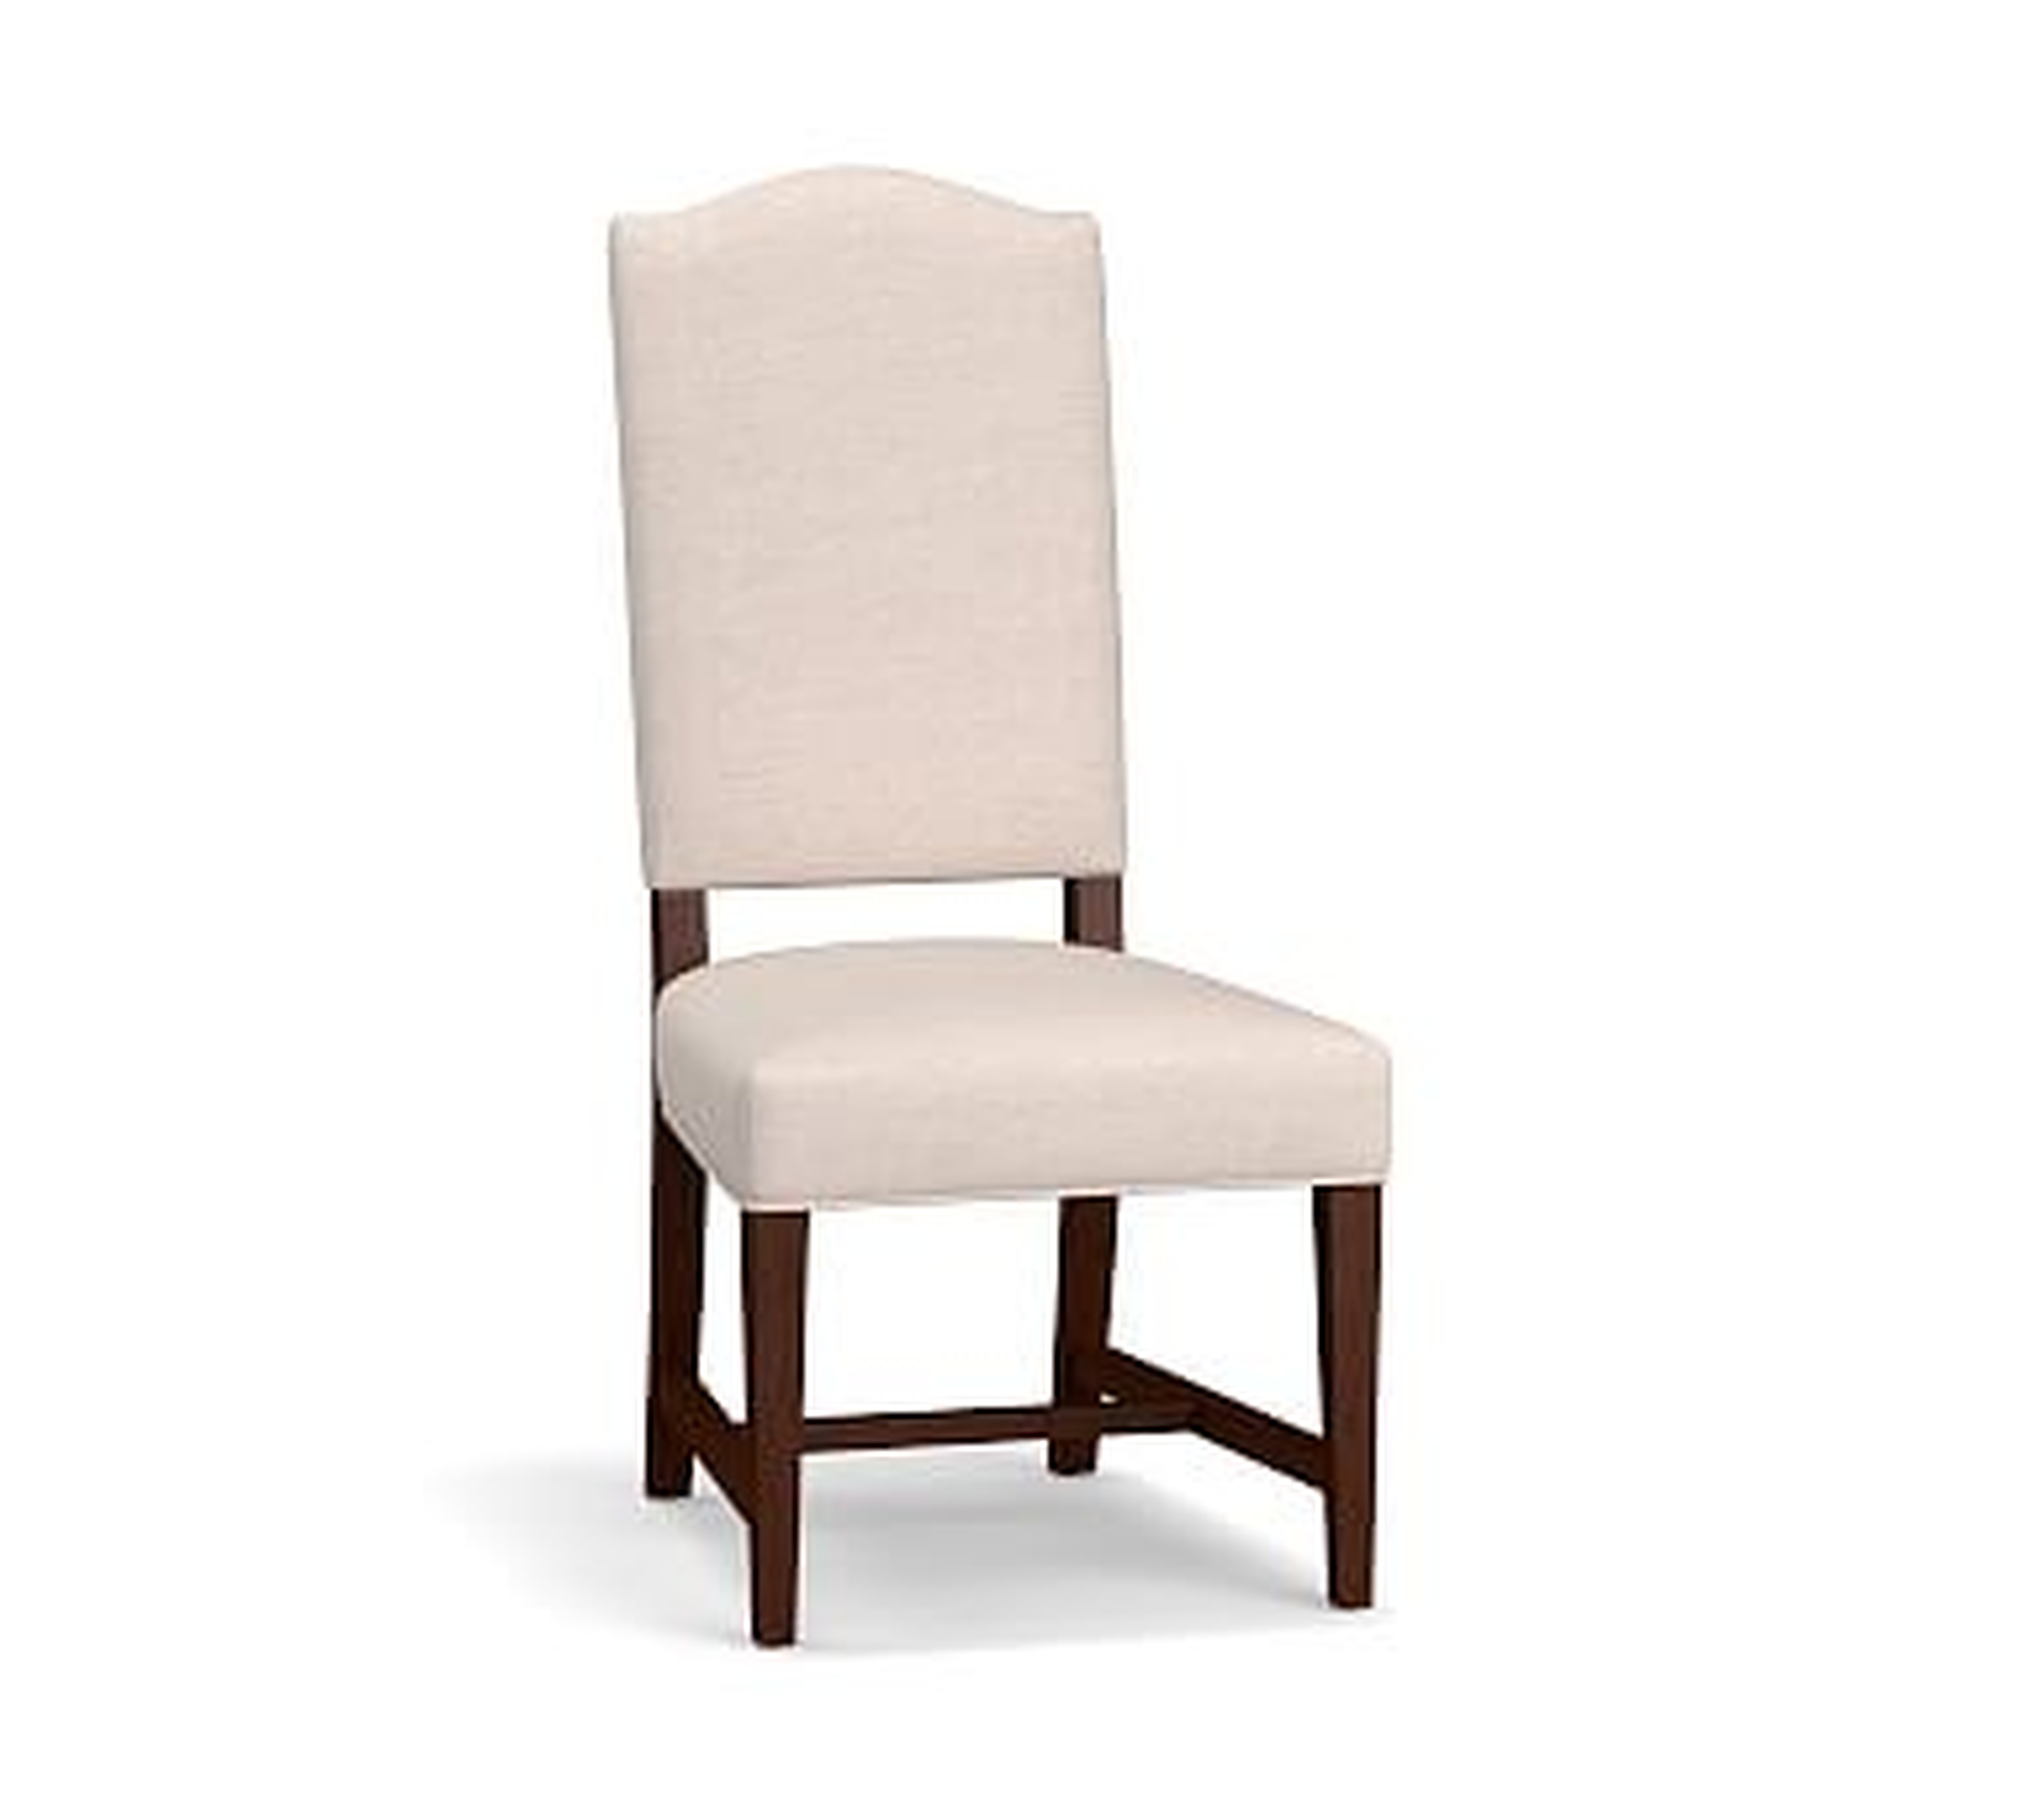 Ashton Upholstered Non-Tufted Dining Side Chair, Mahogany Frame, Performance Brushed Basketweave Oatmeal - Pottery Barn